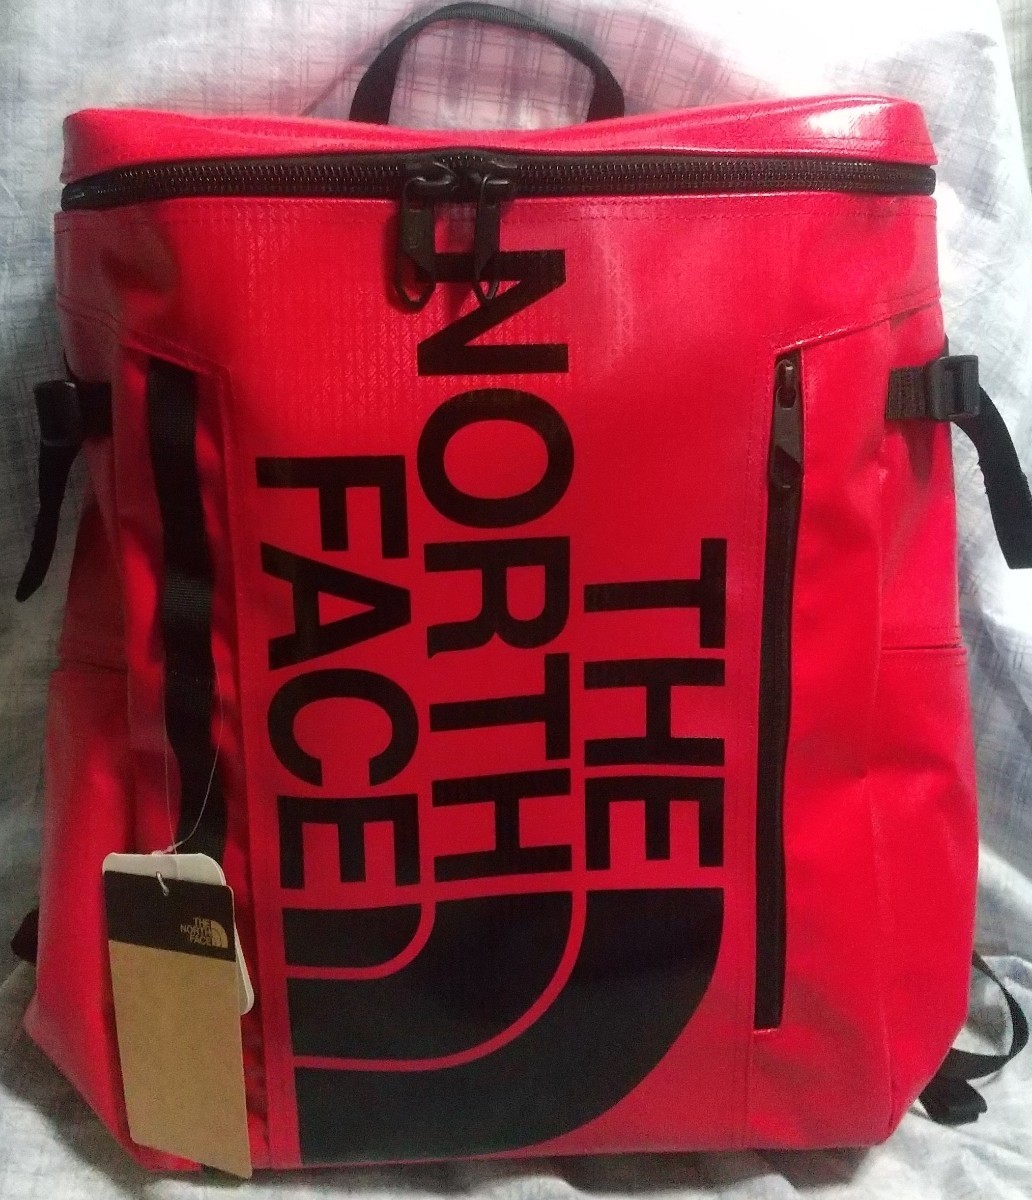 THE NORTH FACE BCFuseBoxII rucksack red size 30L length 47cm width 32cm inset 14cm unused new goods 